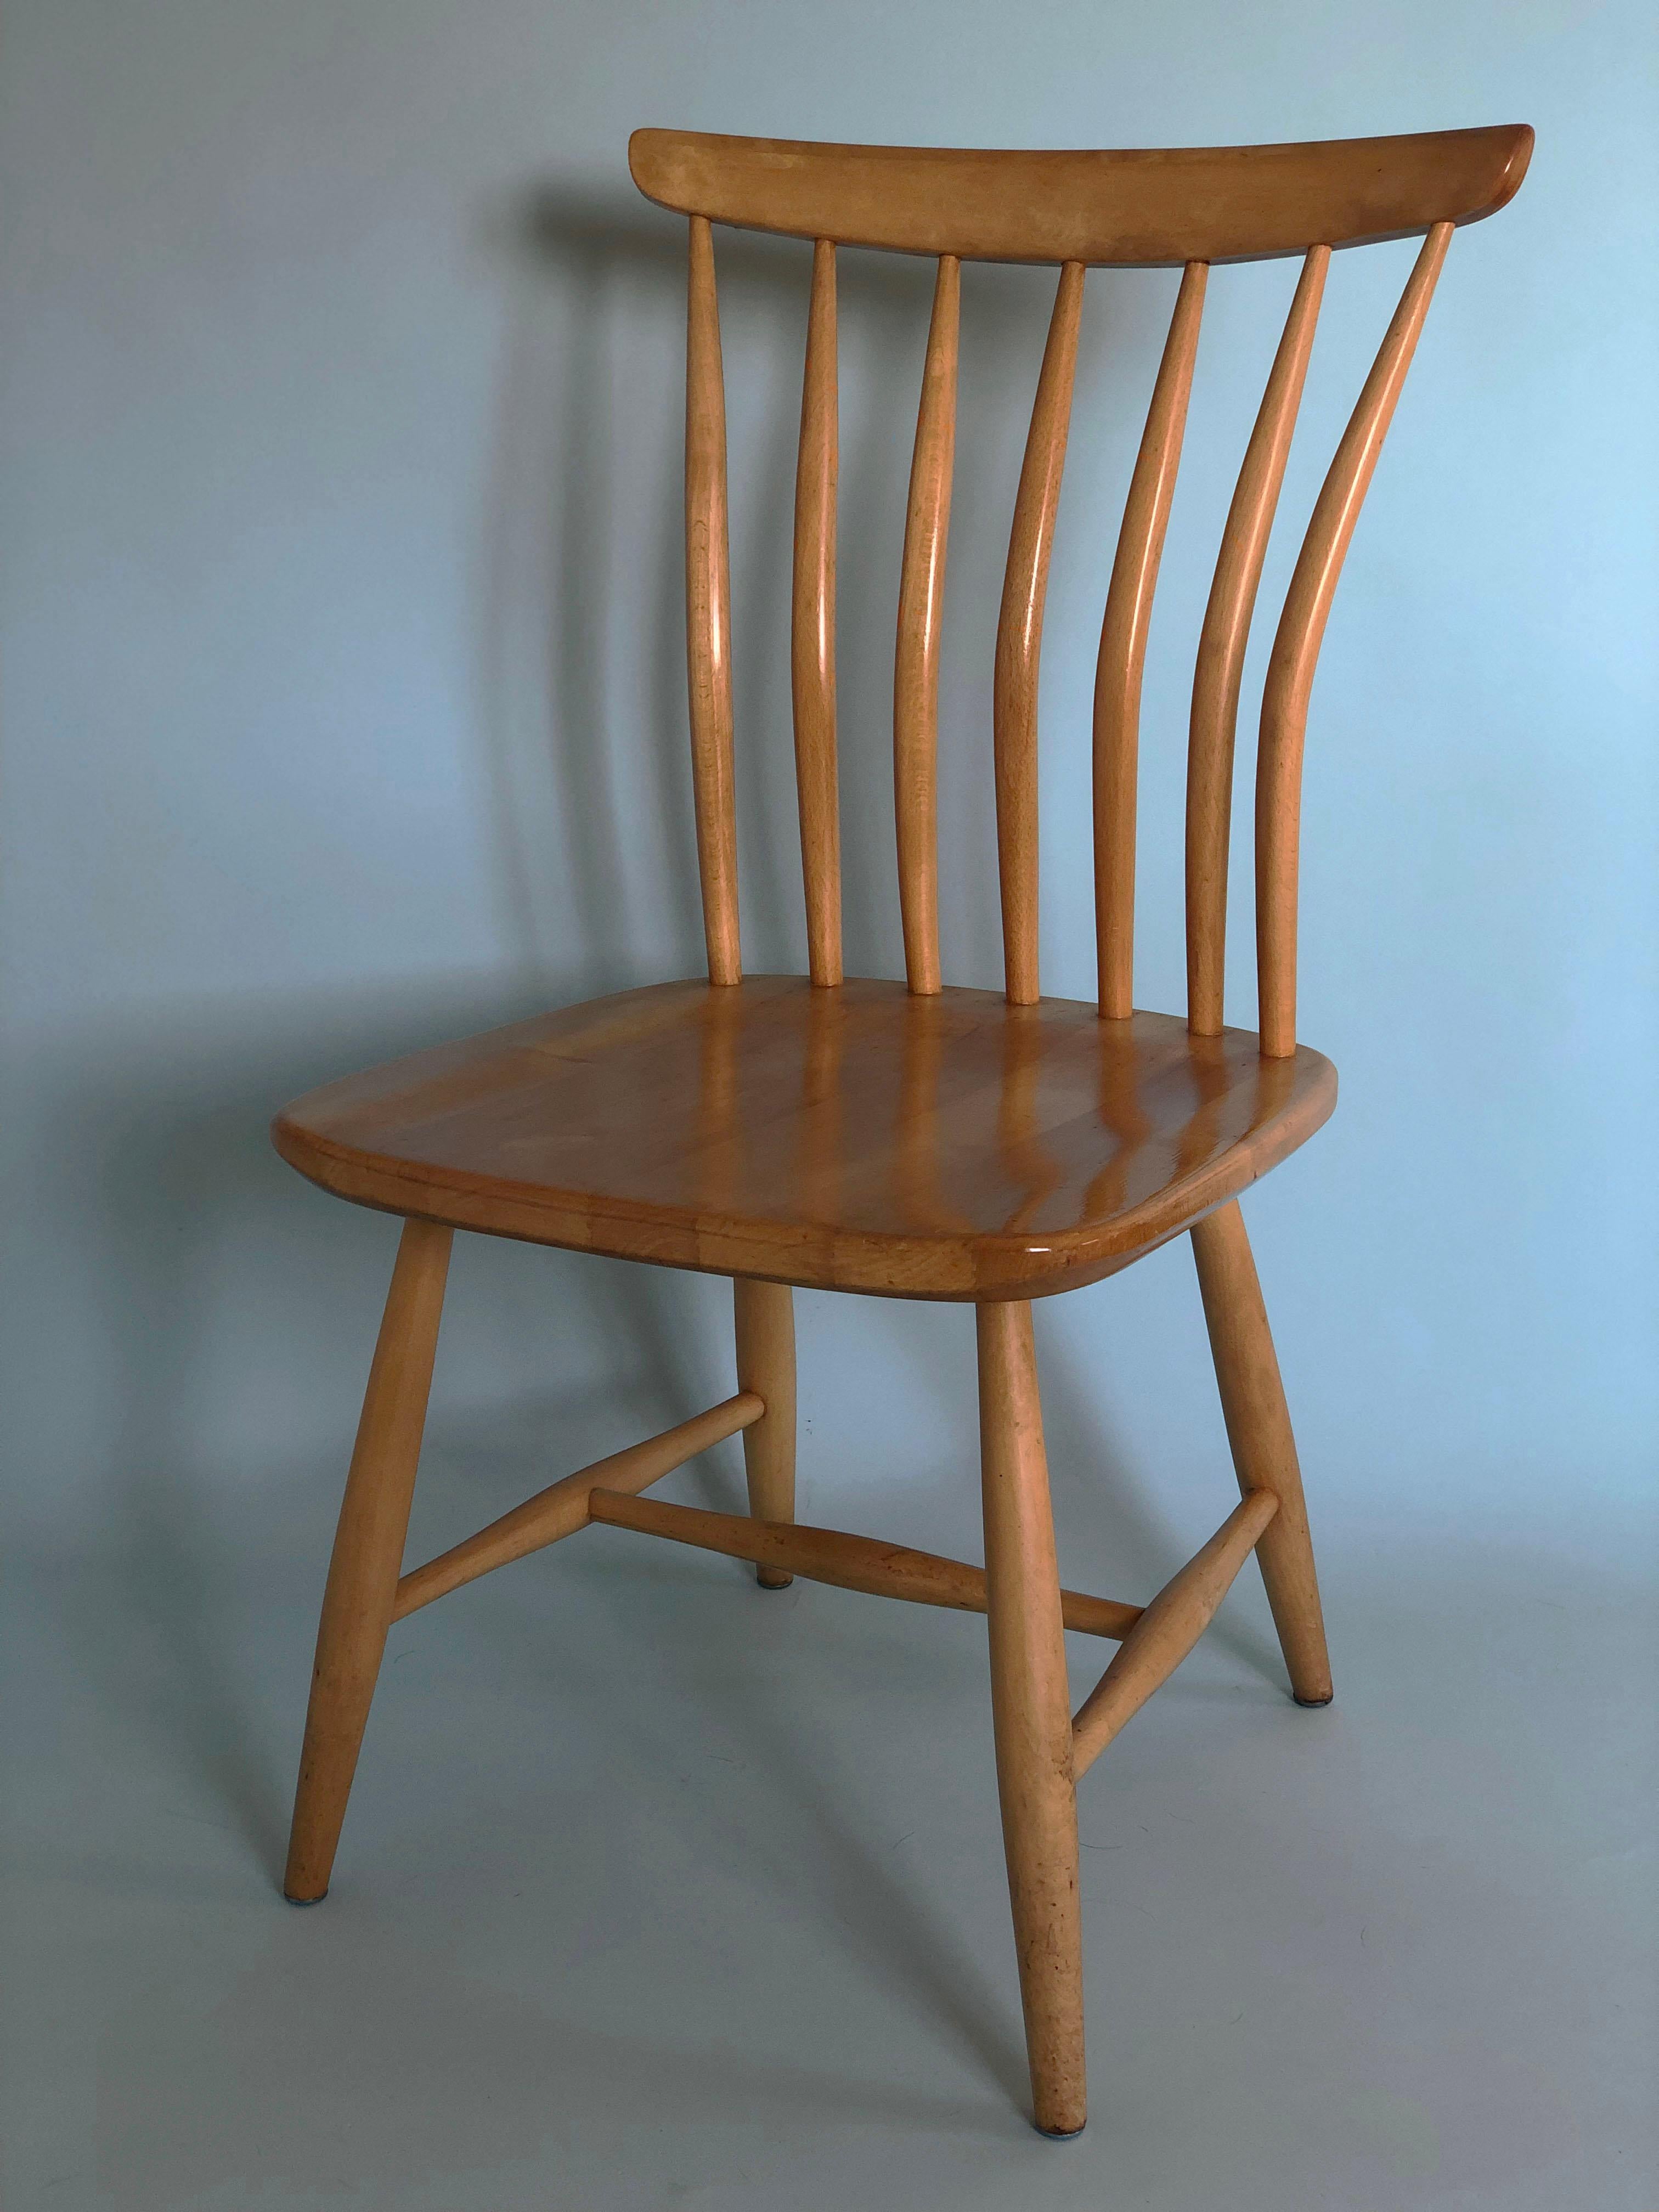 Mid Century Scandinavian design dining chairs from Sweden. Bengt Akerblom for Akerblom chairs 1950s. The seat and back are shaped for a good sitting position. Each chair has a brand plate and brand 'H' on the bottom.

In good condition. Sweden,